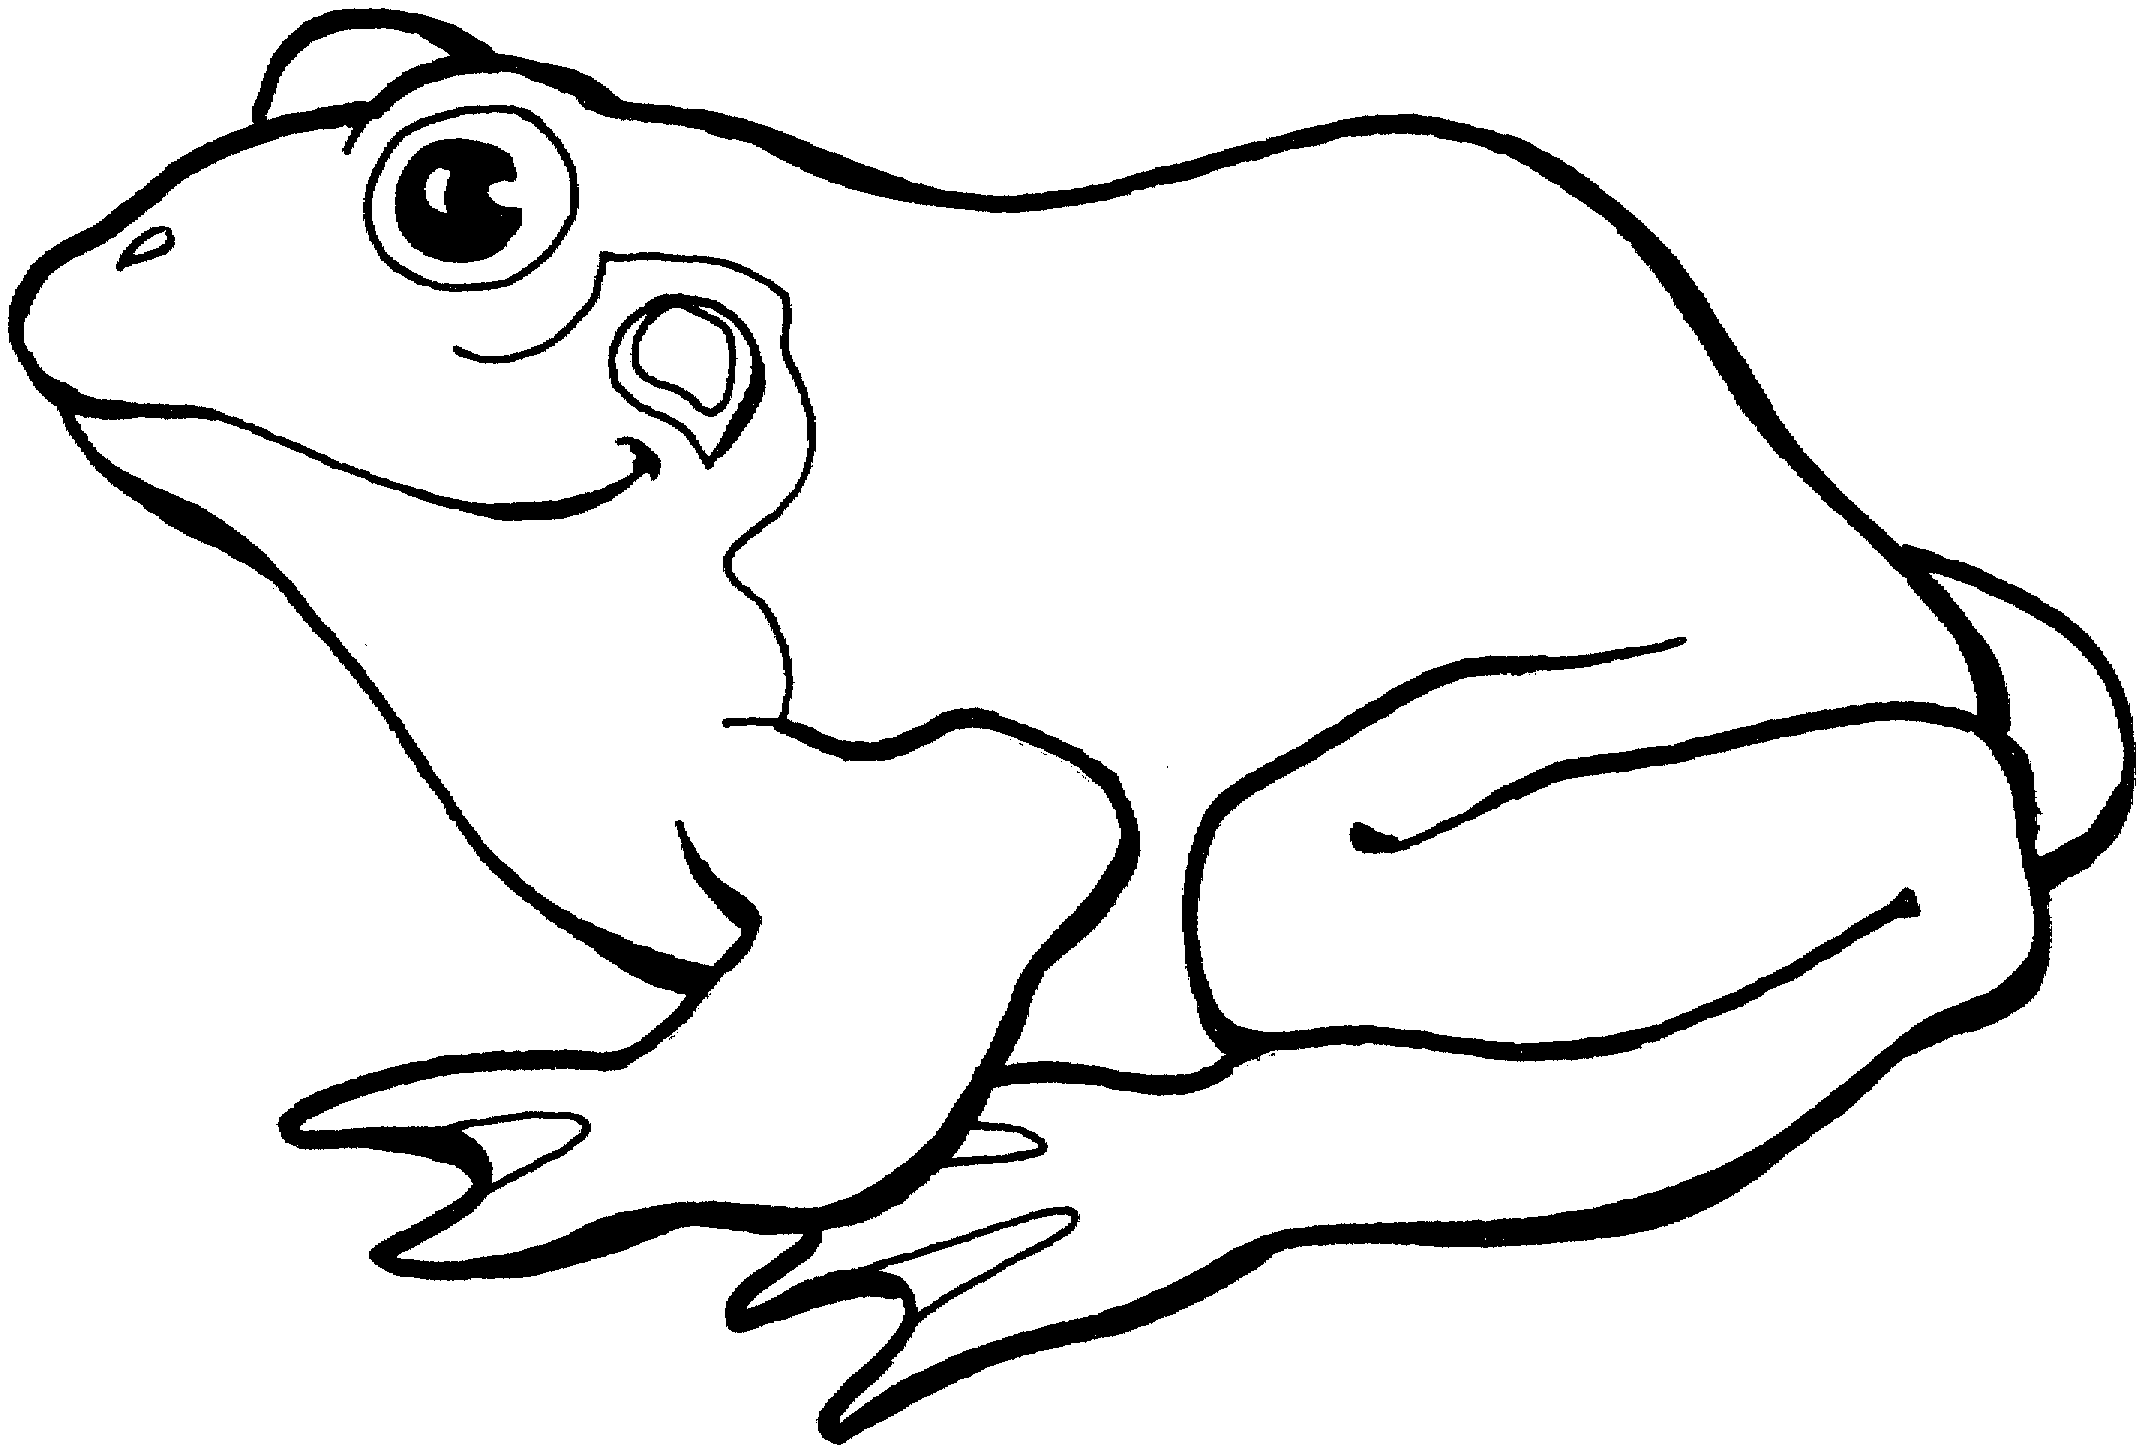 crazy frog coloring pages - Frog Coloring Pages Printable | Frog coloring  pages, Animal coloring pages, Frog drawing